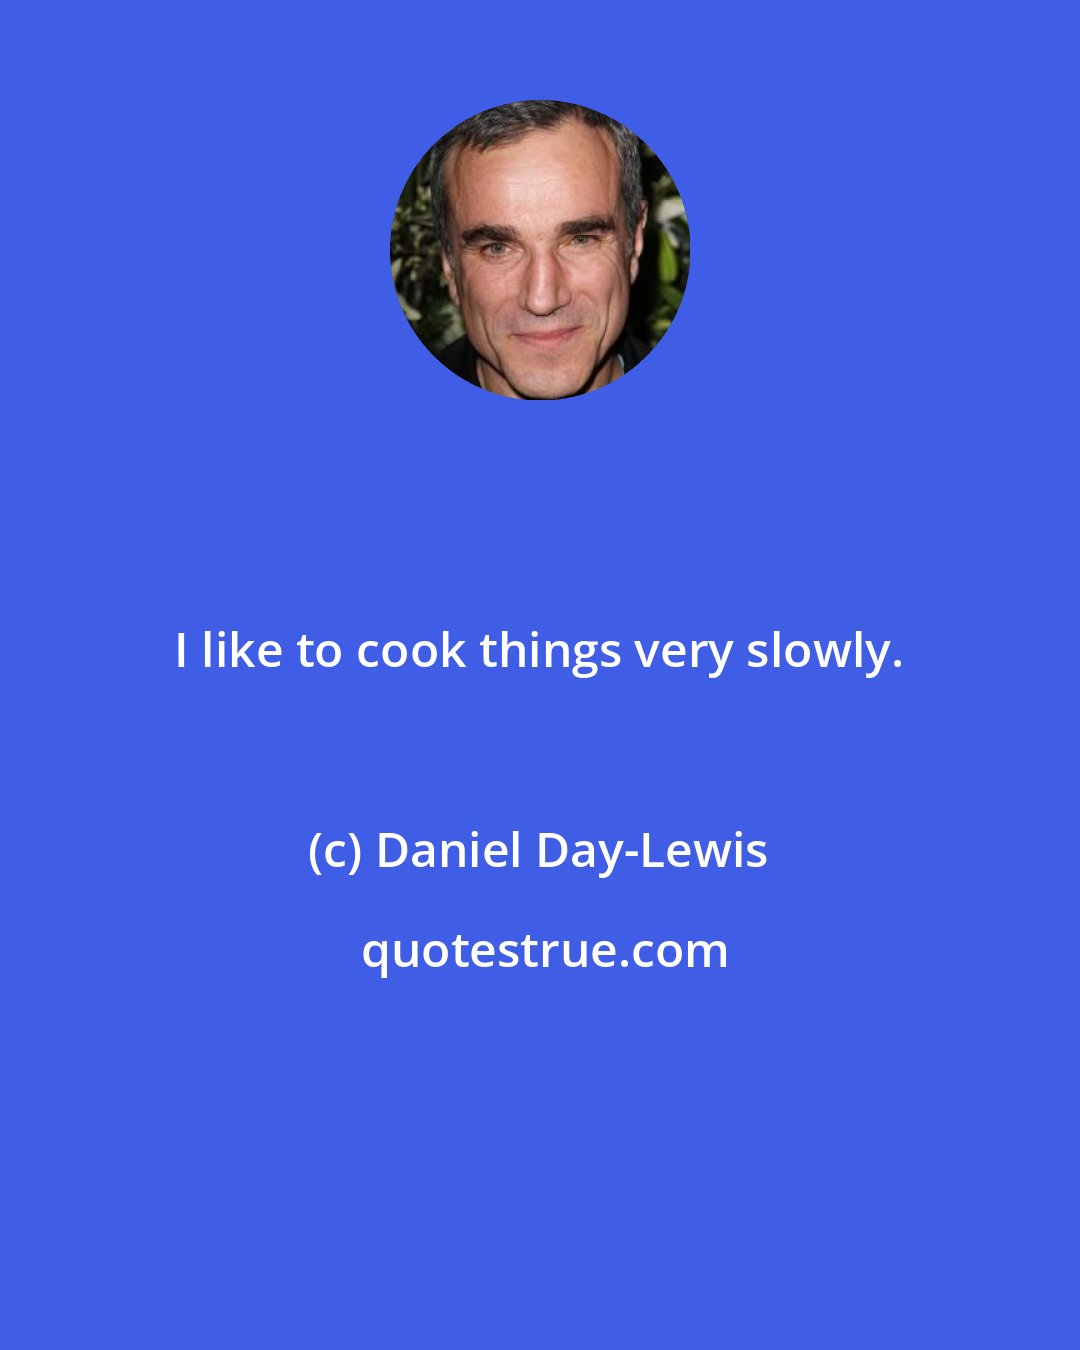 Daniel Day-Lewis: I like to cook things very slowly.